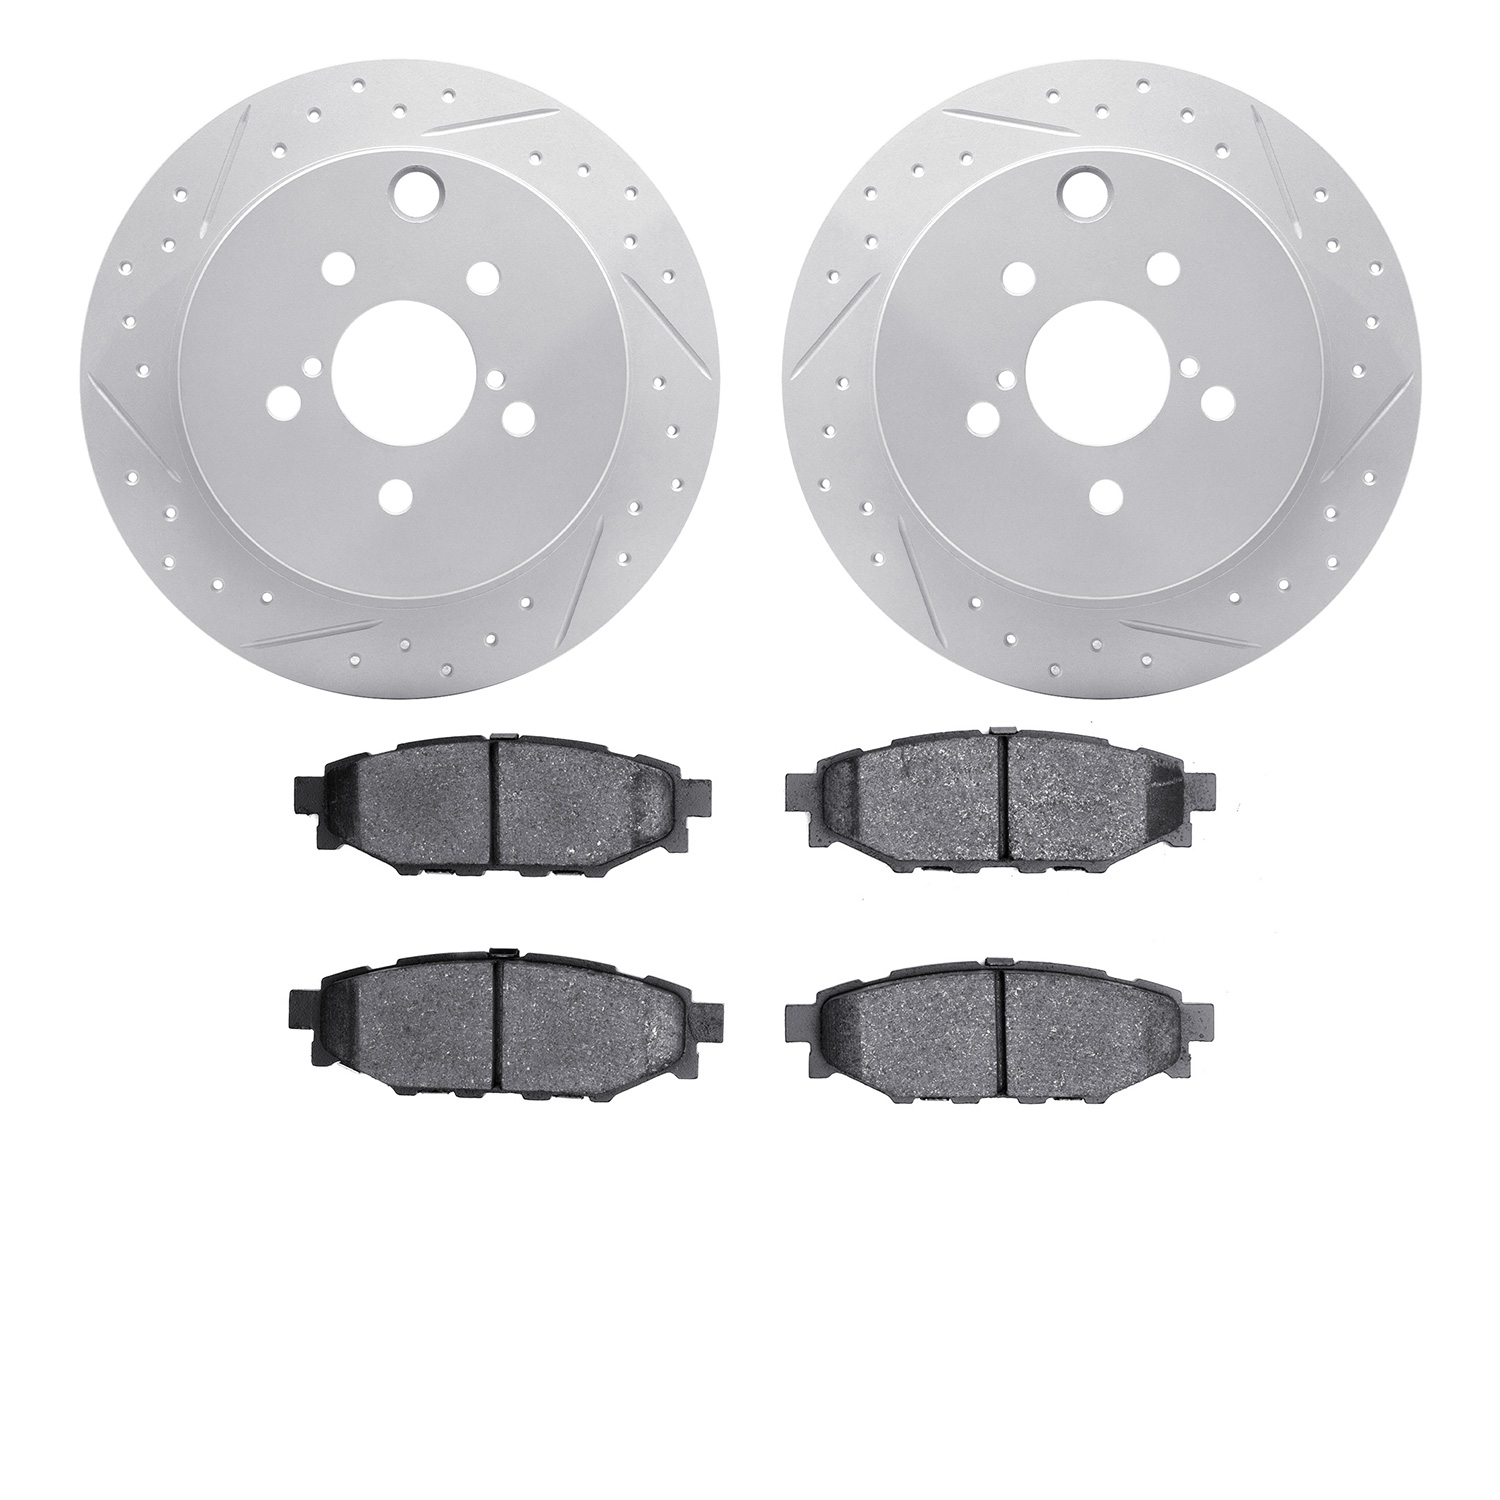 2502-13043 Geoperformance Drilled/Slotted Rotors w/5000 Advanced Brake Pads Kit, Fits Select Subaru, Position: Rear